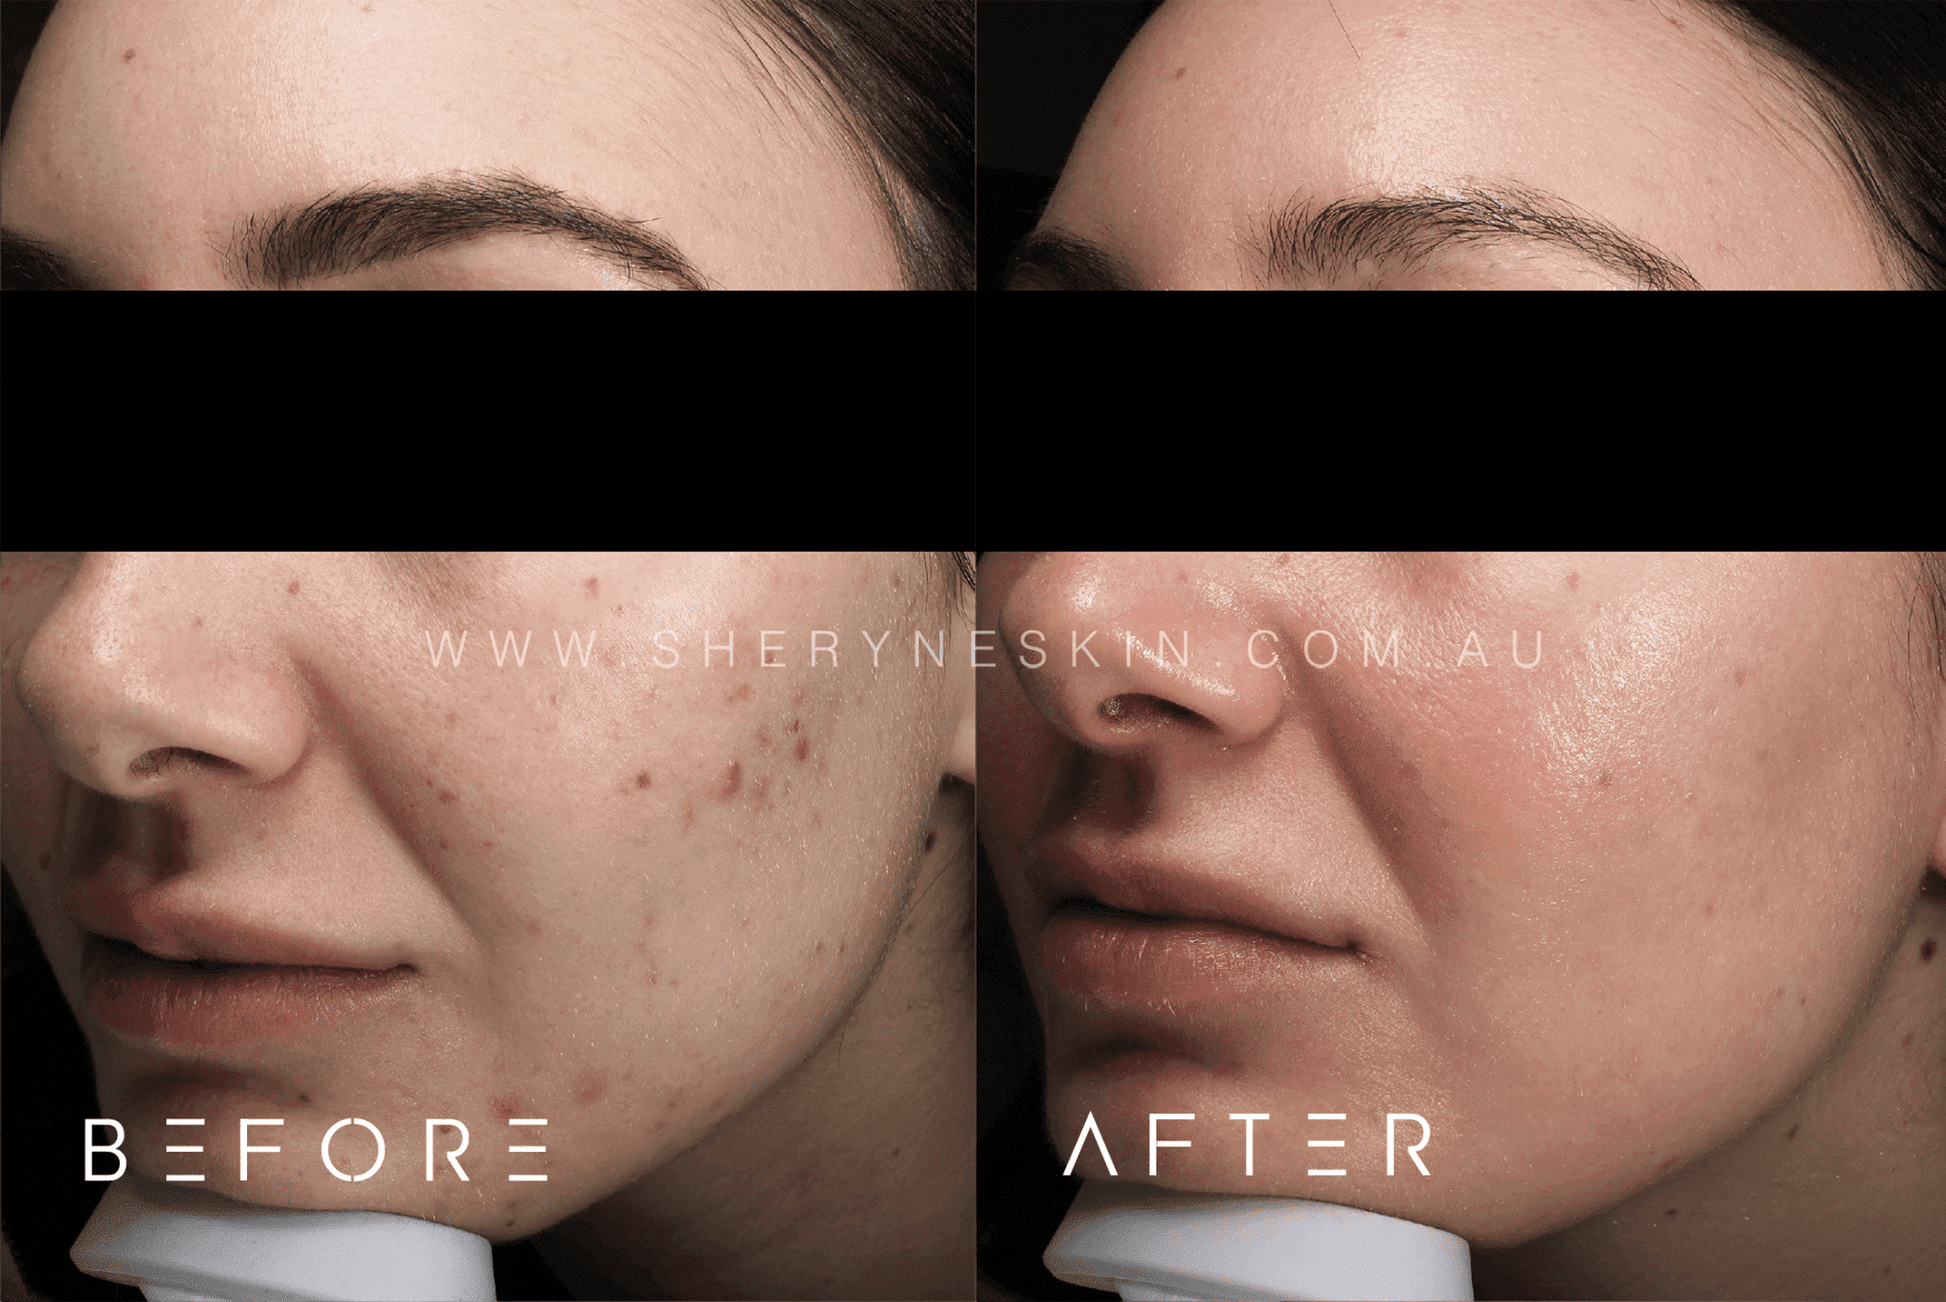 Before-and-after images showing a dramatic improvement in acne treatment at Sheryne Skin Clinic. The ‘before’ photo displays extensive acne, with redness and blemishes visible on the skin. The ‘after’ photo reveals significantly clearer skin, with a reduction in inflammation and blemishes, highlighting the effectiveness of the acne treatment provided.